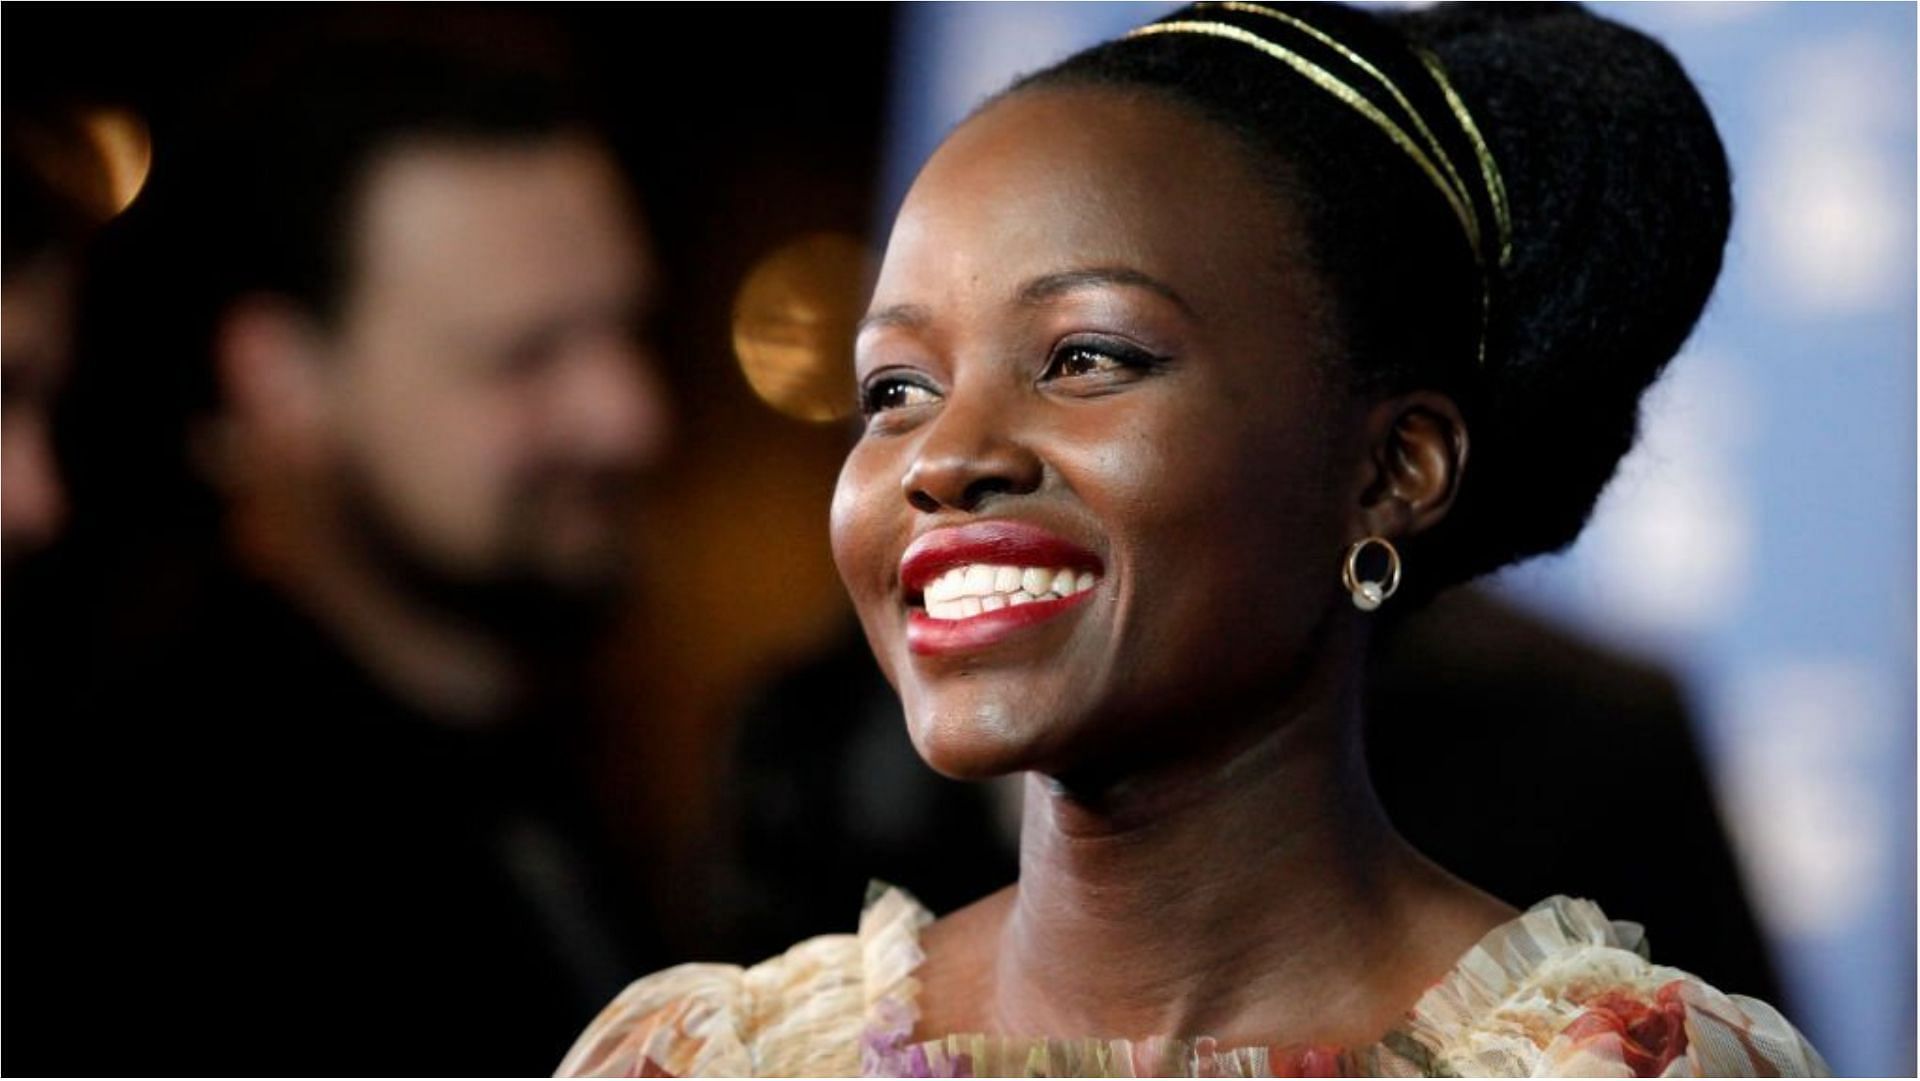 Lupita Nyong&#039;o reprised her role as Nakia in Black Panther: Wakanda Forever (Image via Tibrina Hobson/Getty Images)